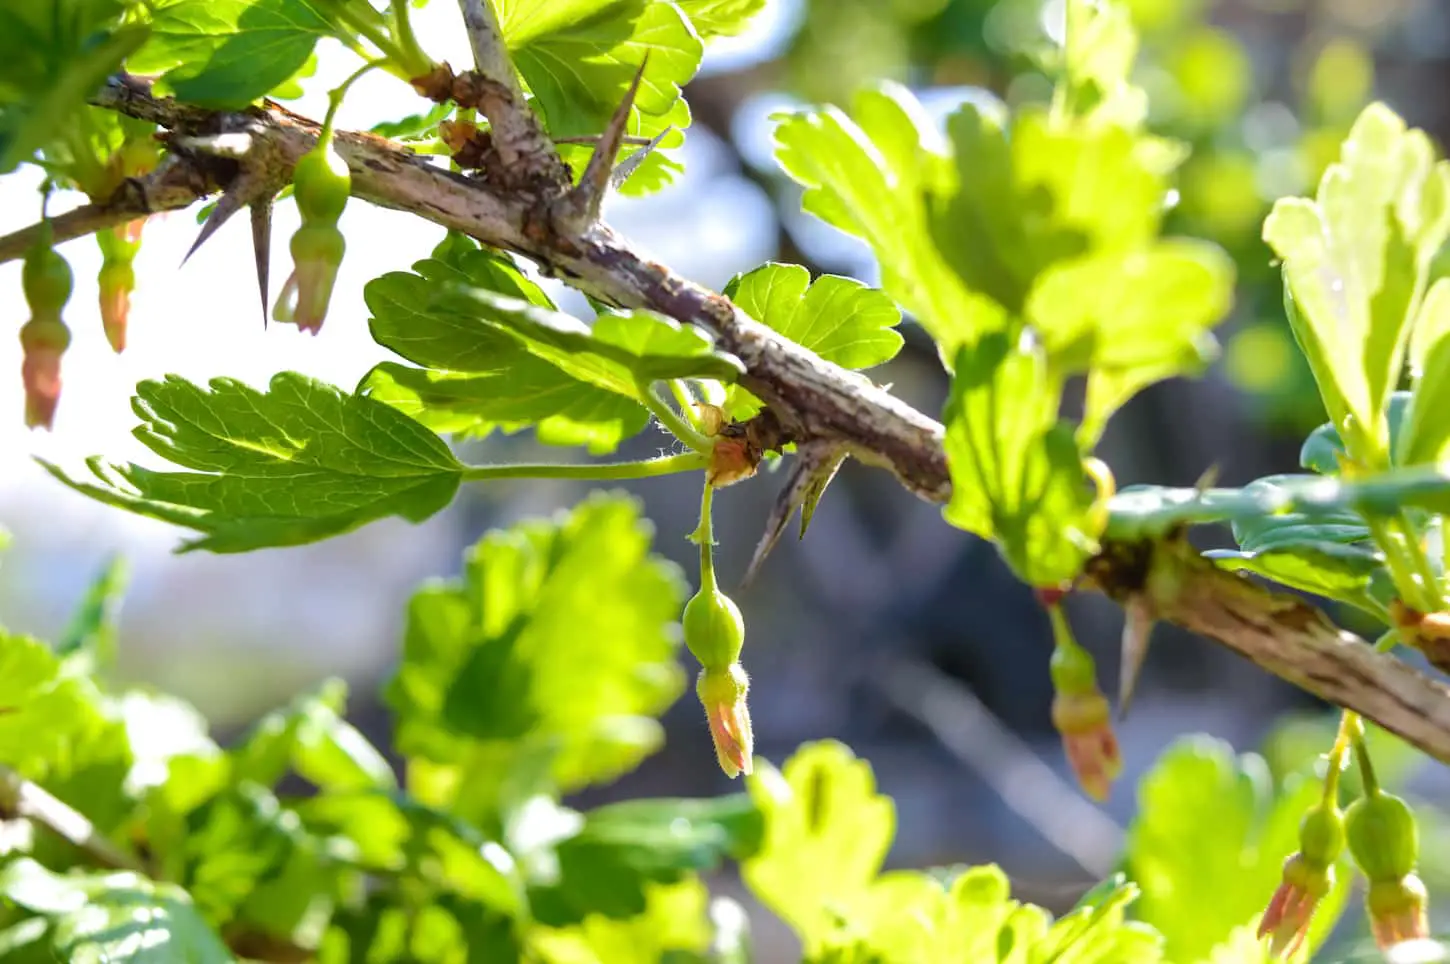 An image of green gooseberry branches with unripe berries during summer.